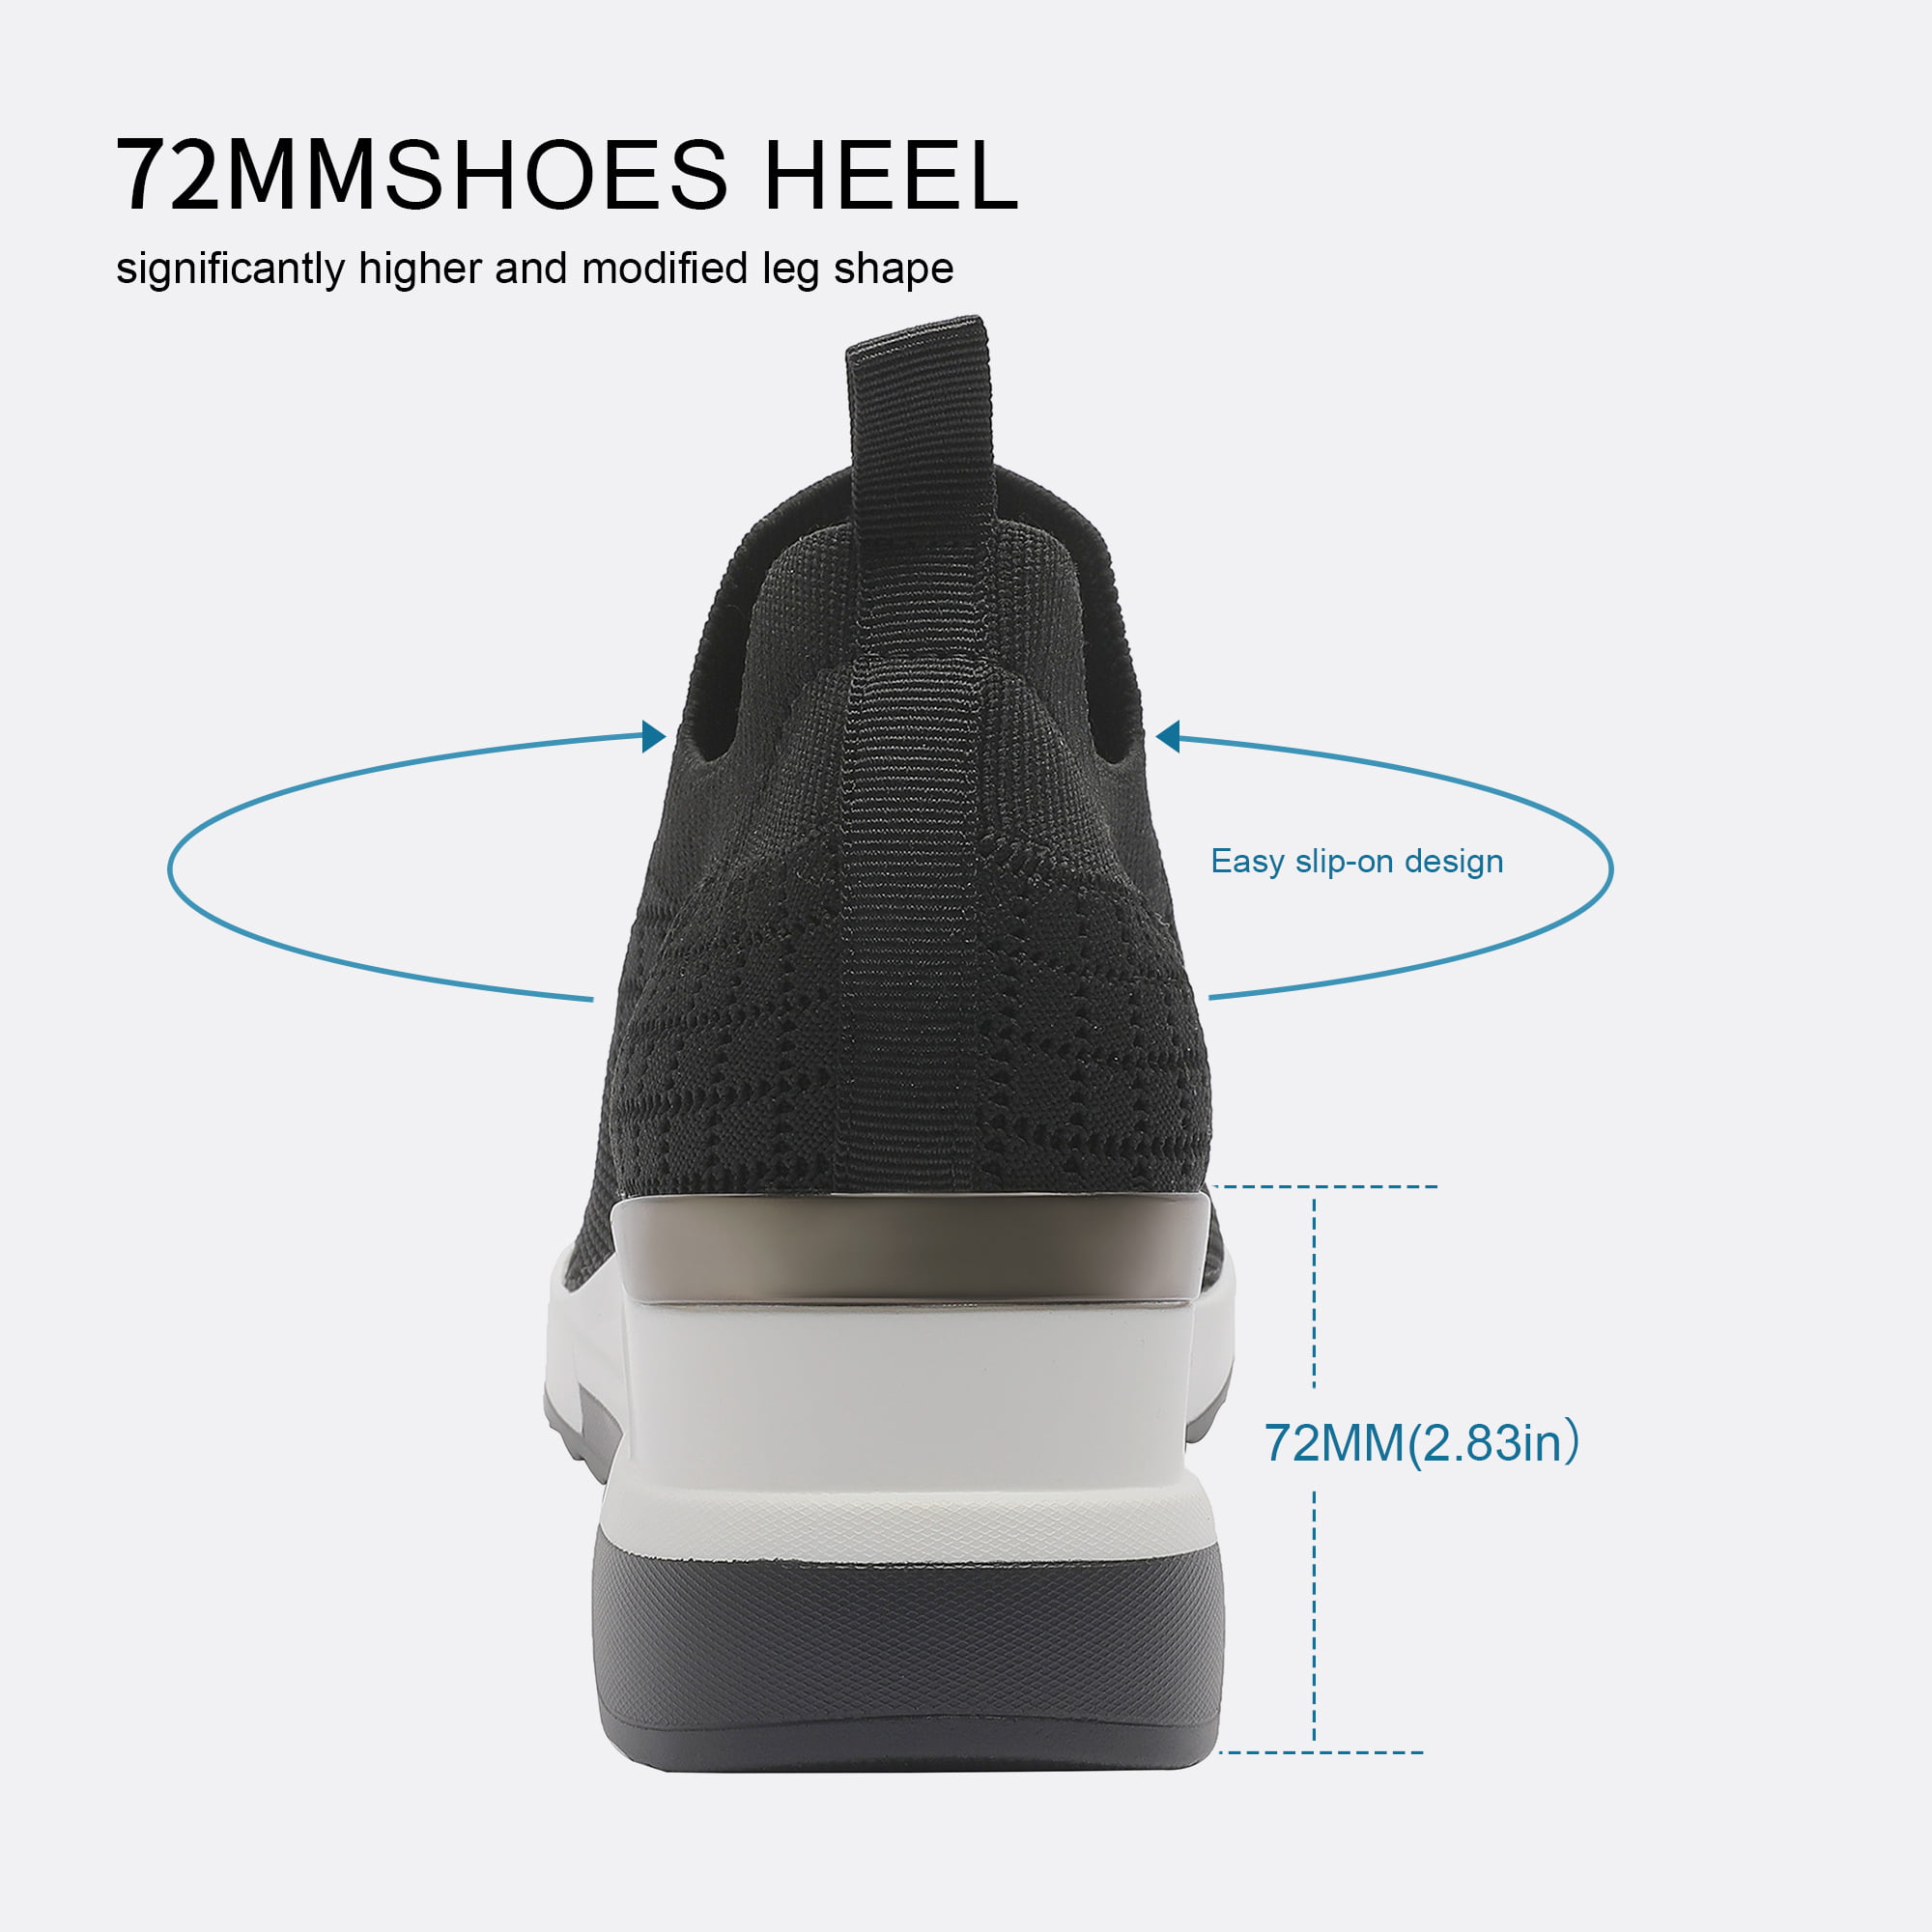  YZ High Heel Black Wedge Sneakers for Women Knit Upper  Breathable Shoes | Fashion Sneakers